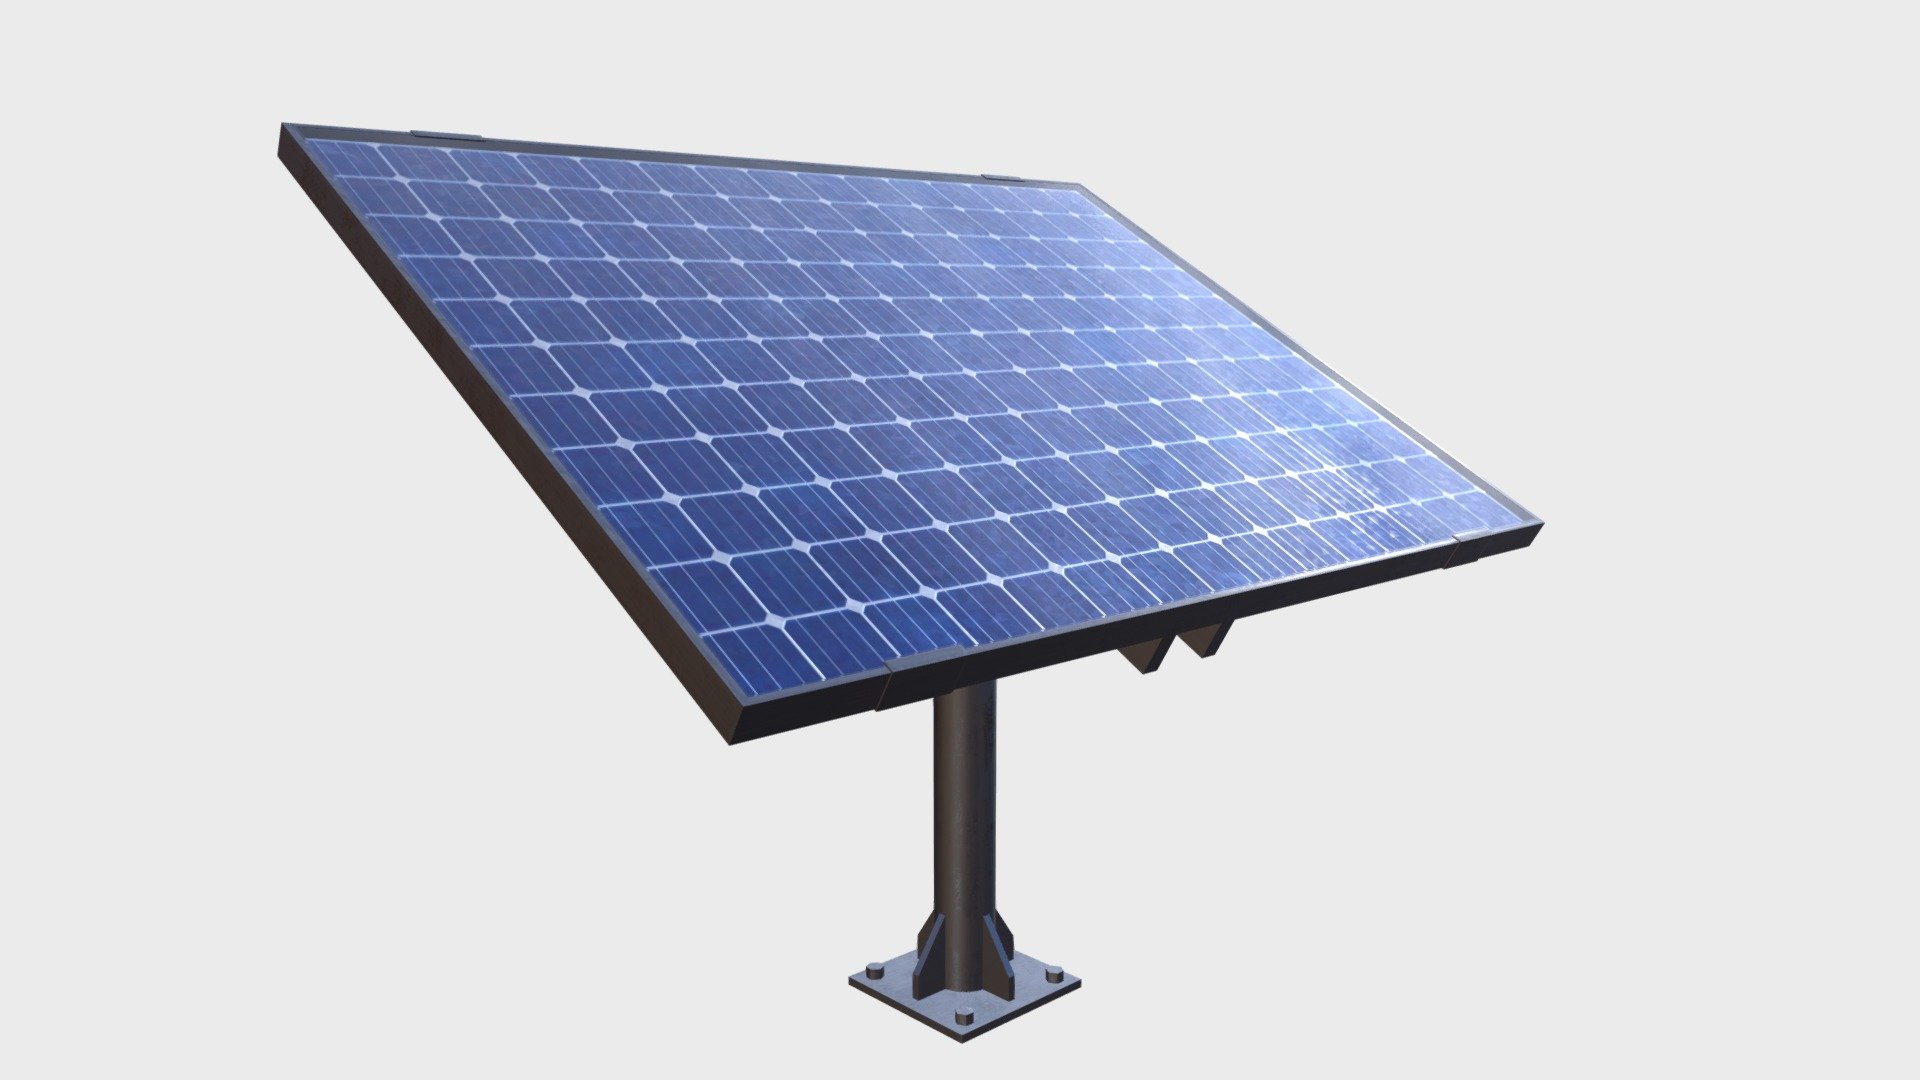 3D model Solar panels stand alone structure steel column with base VR / AR  / low-poly